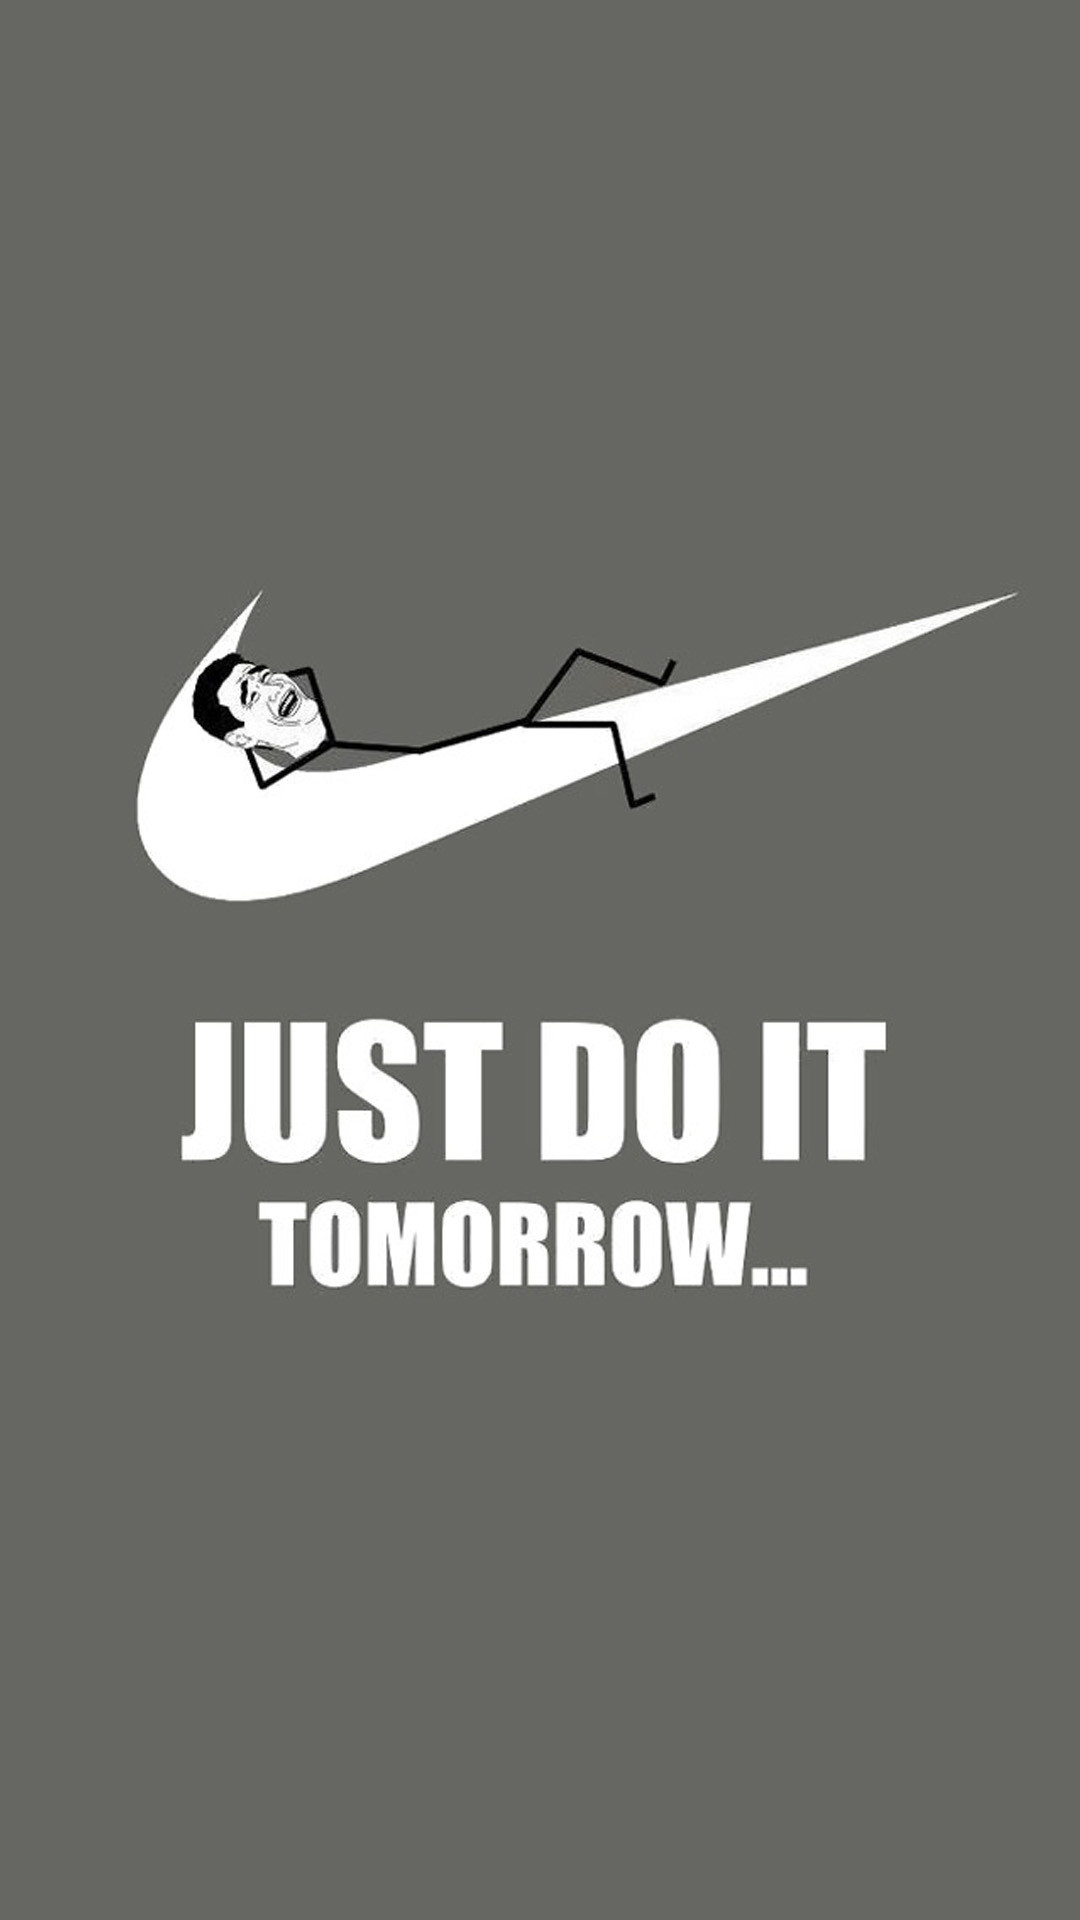 1080x1920 Description: Just Do It Tomorrow Nike wallpaper for iphone 6 plus free  download.